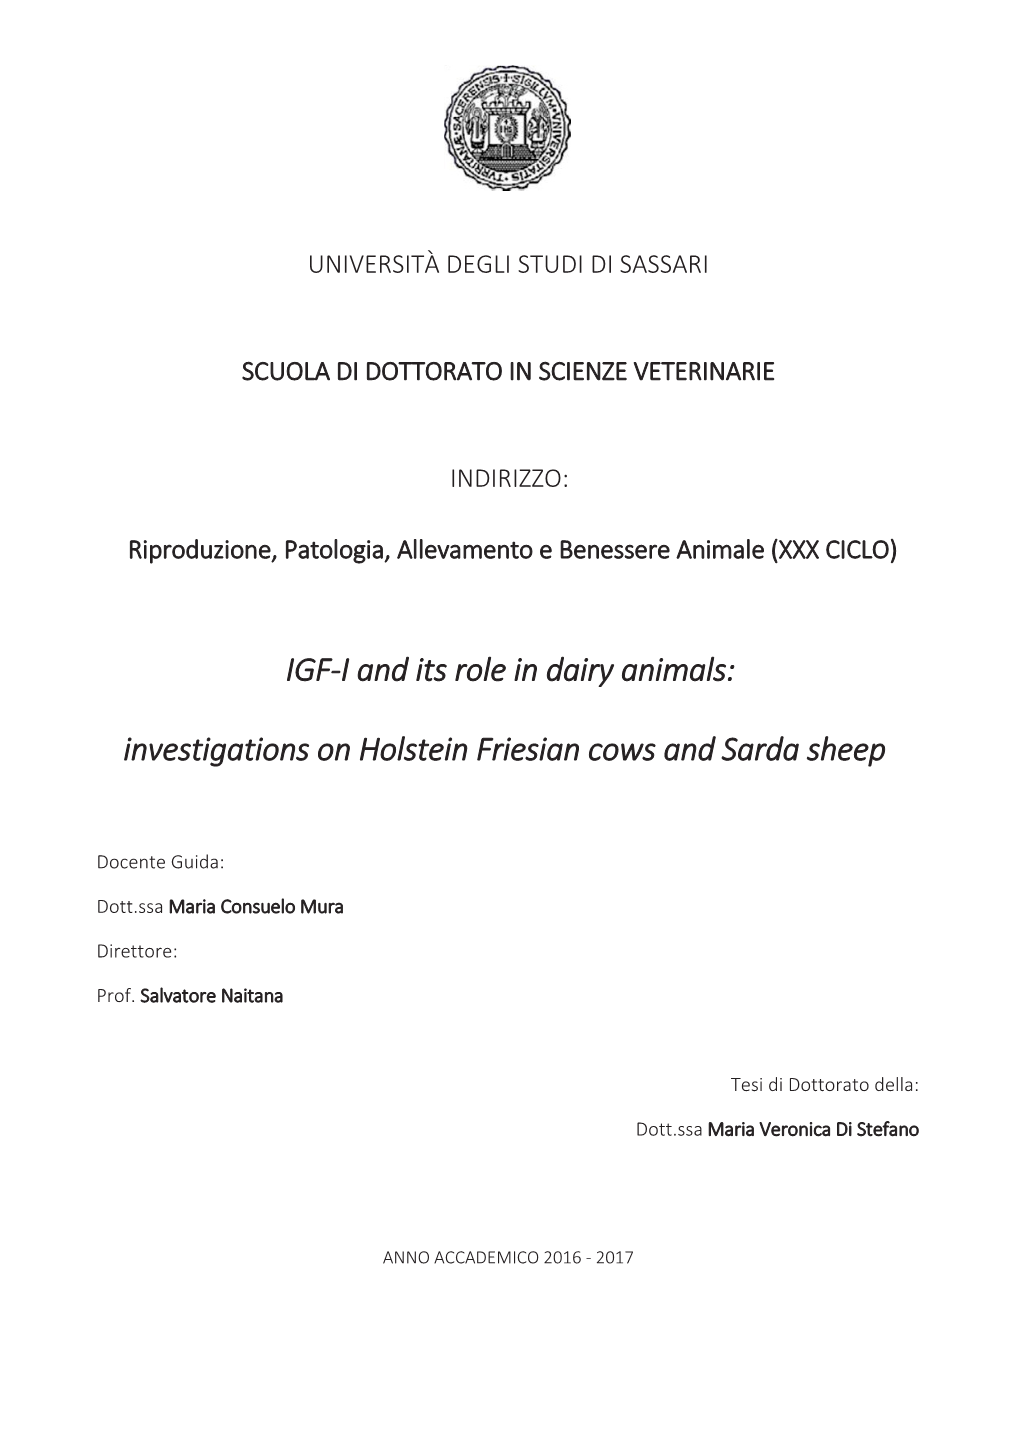 IGF-I and Its Role in Dairy Animals: Investigations on Holstein Friesian Cows and Sarda Sheep” Phd Thesis in Veterinary Science, University of Sassari